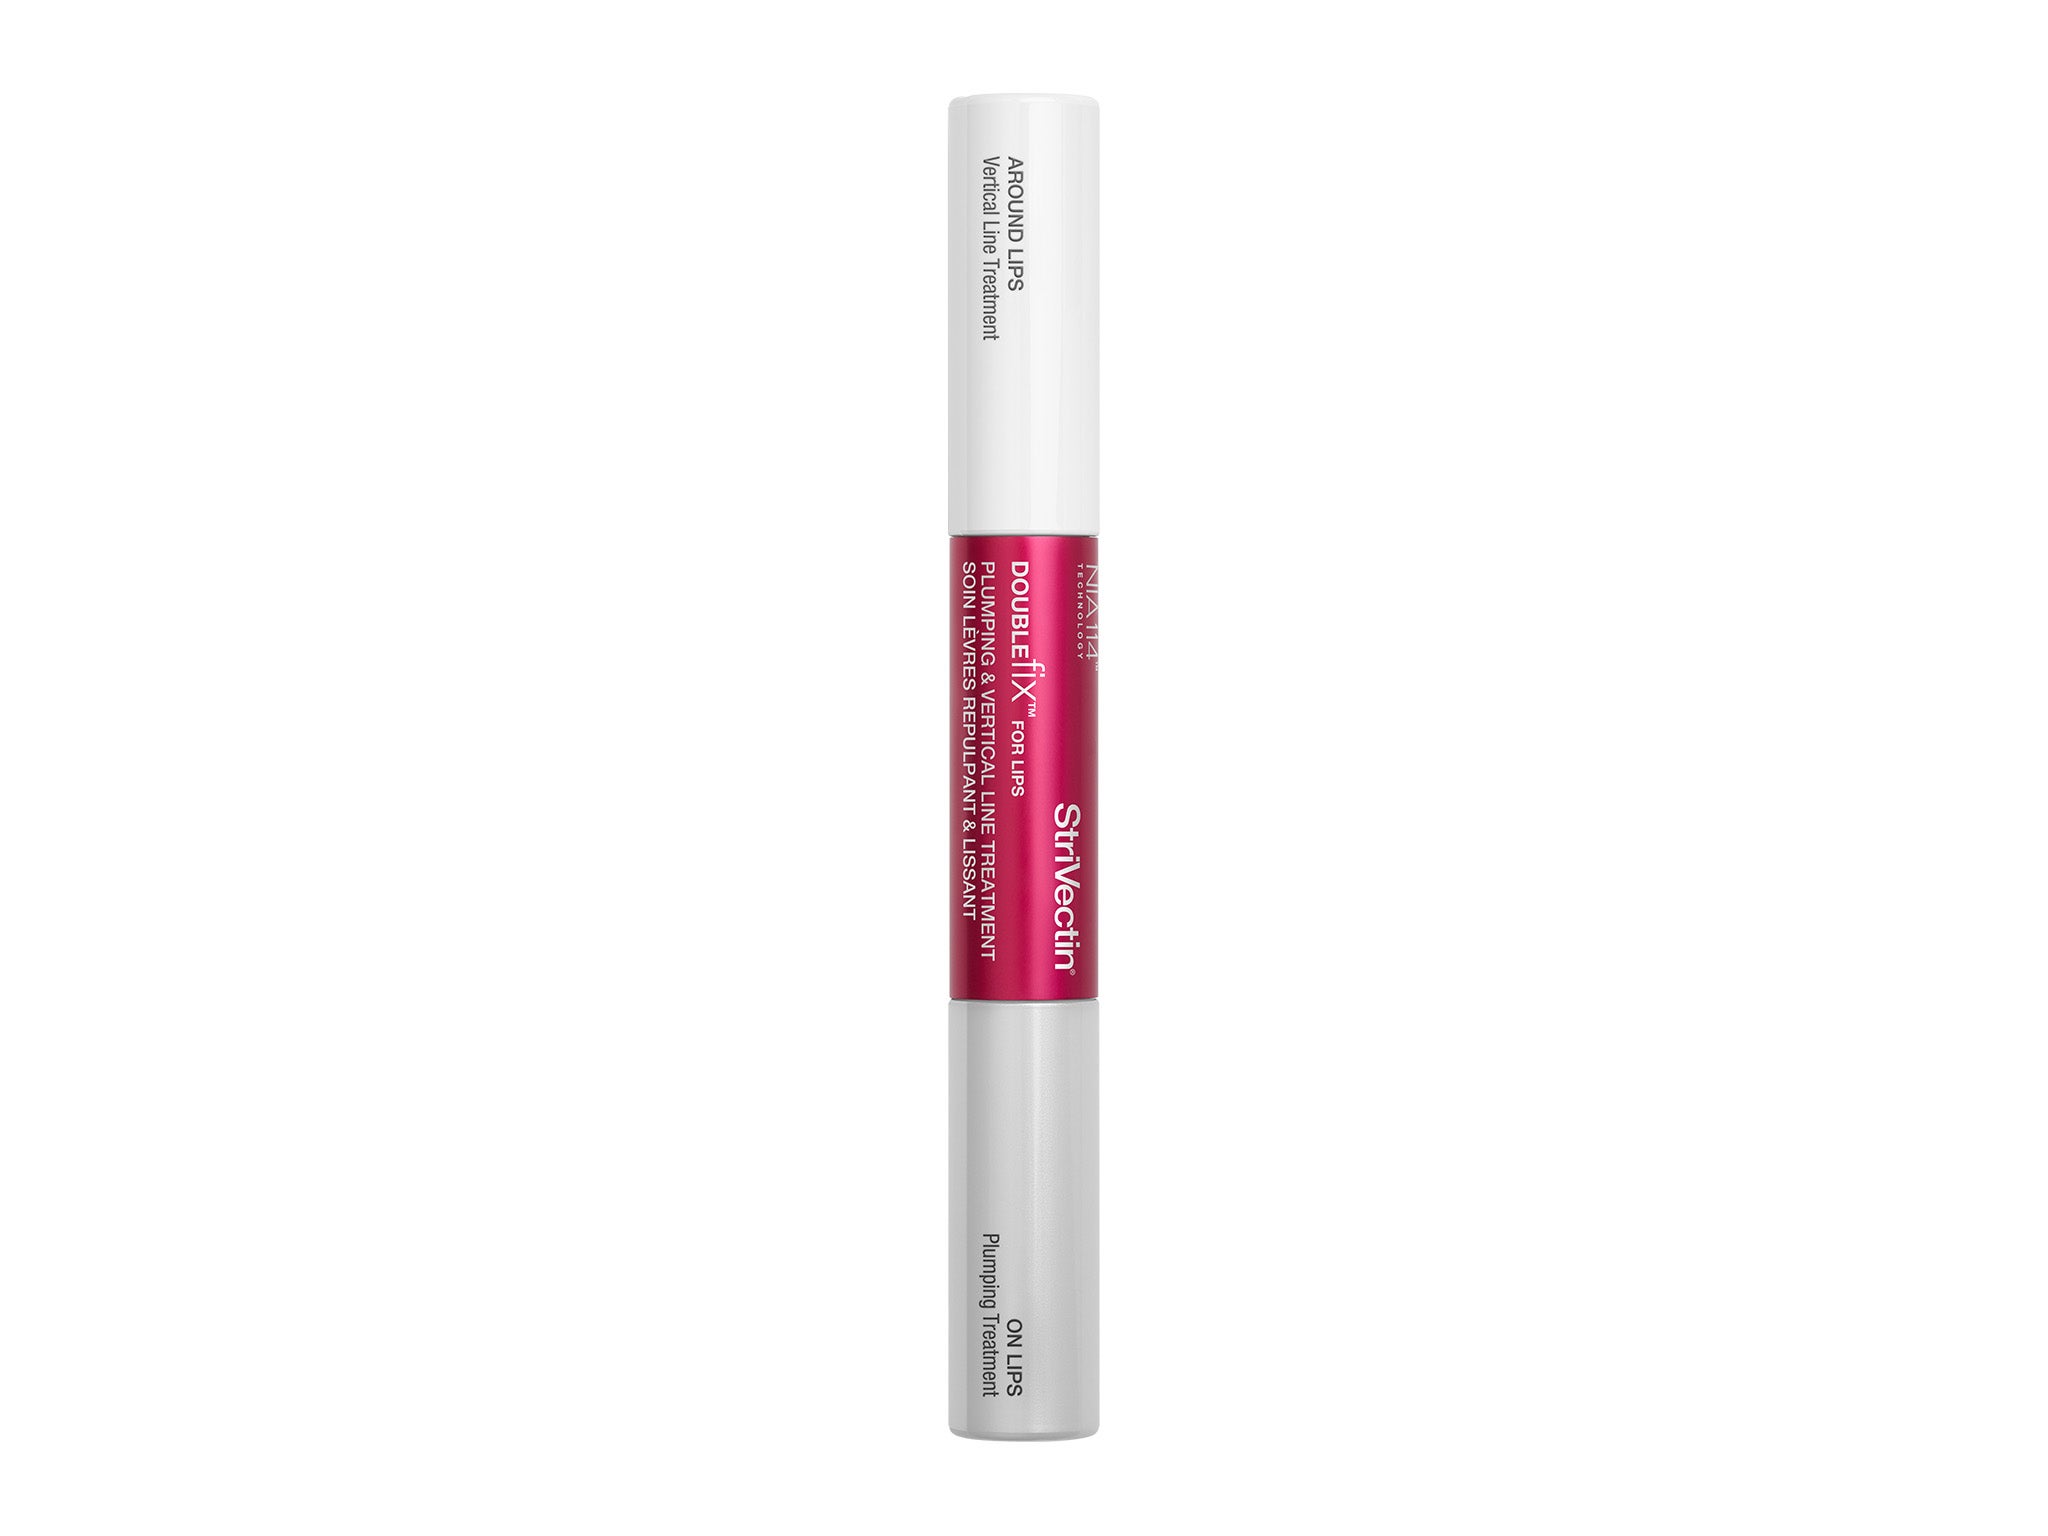 StriVectin anti-wrinkle double fix for lips plumping and vertical line treatment